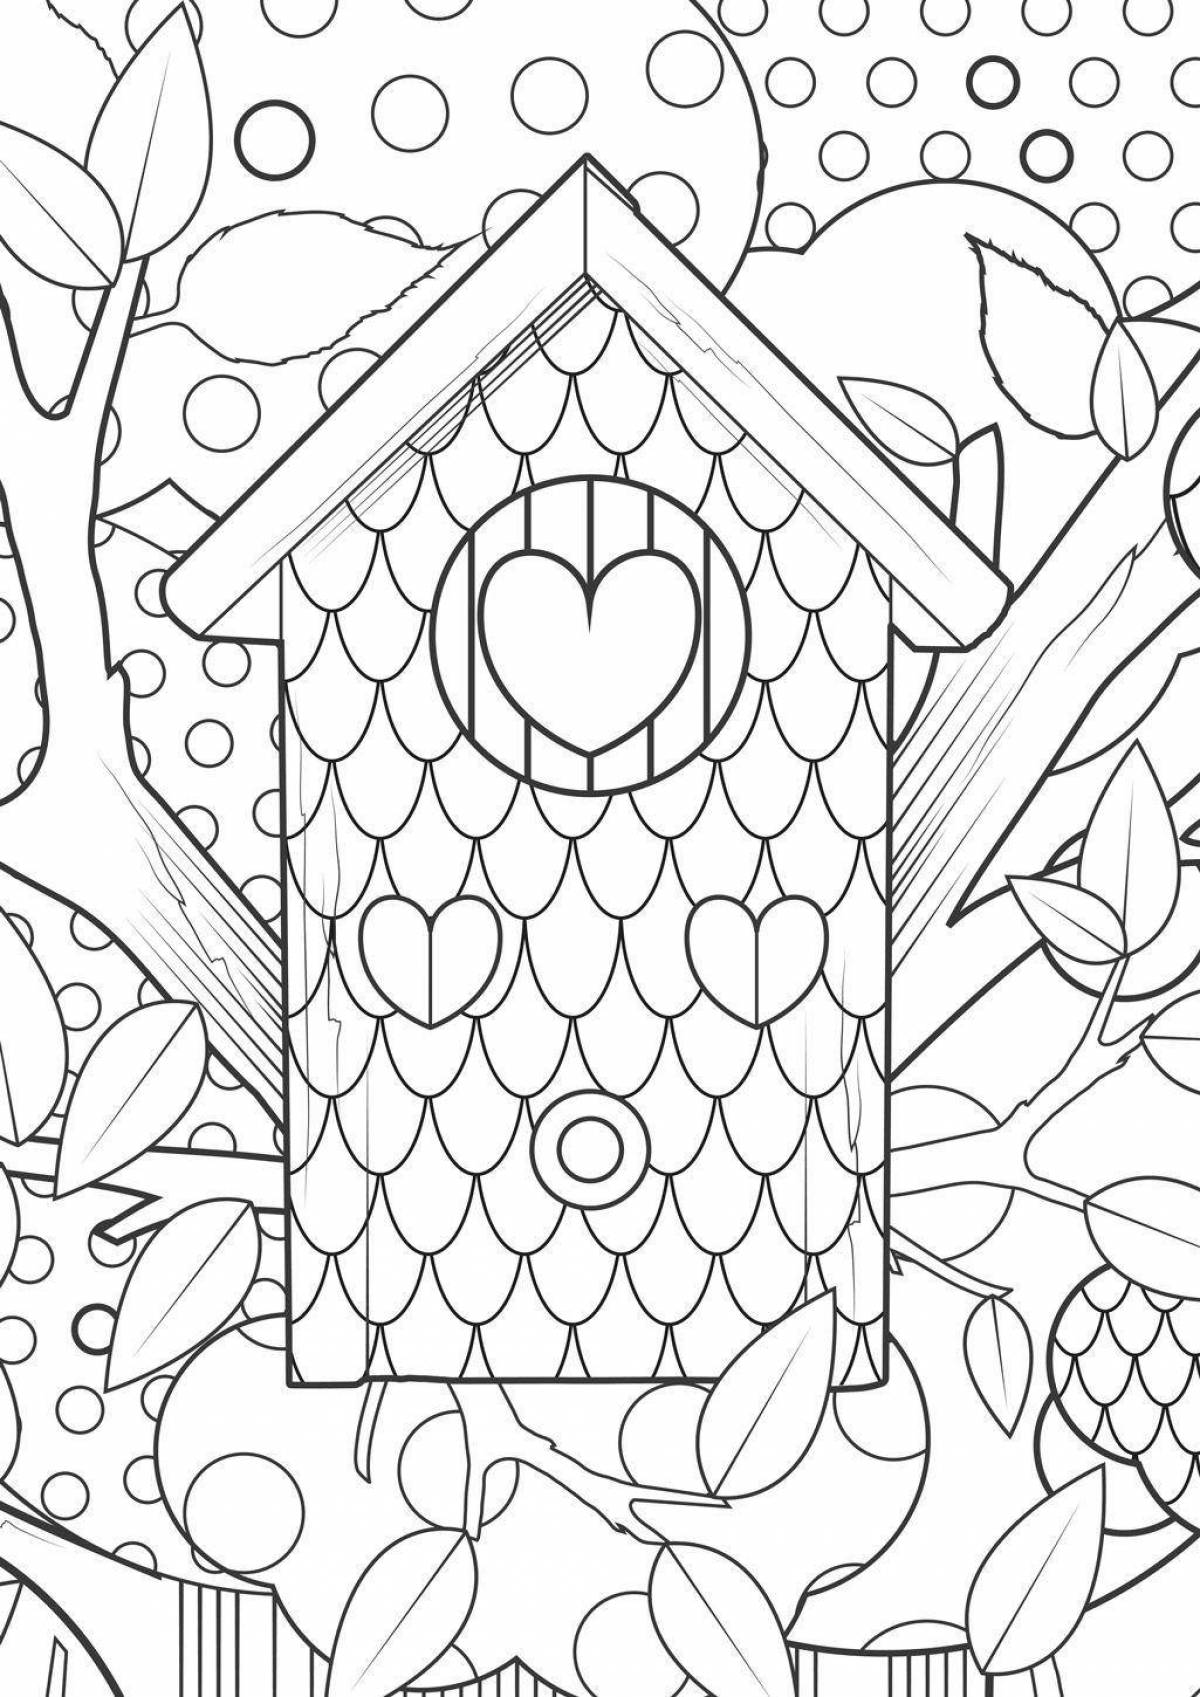 Coloring book cheerful birdhouse